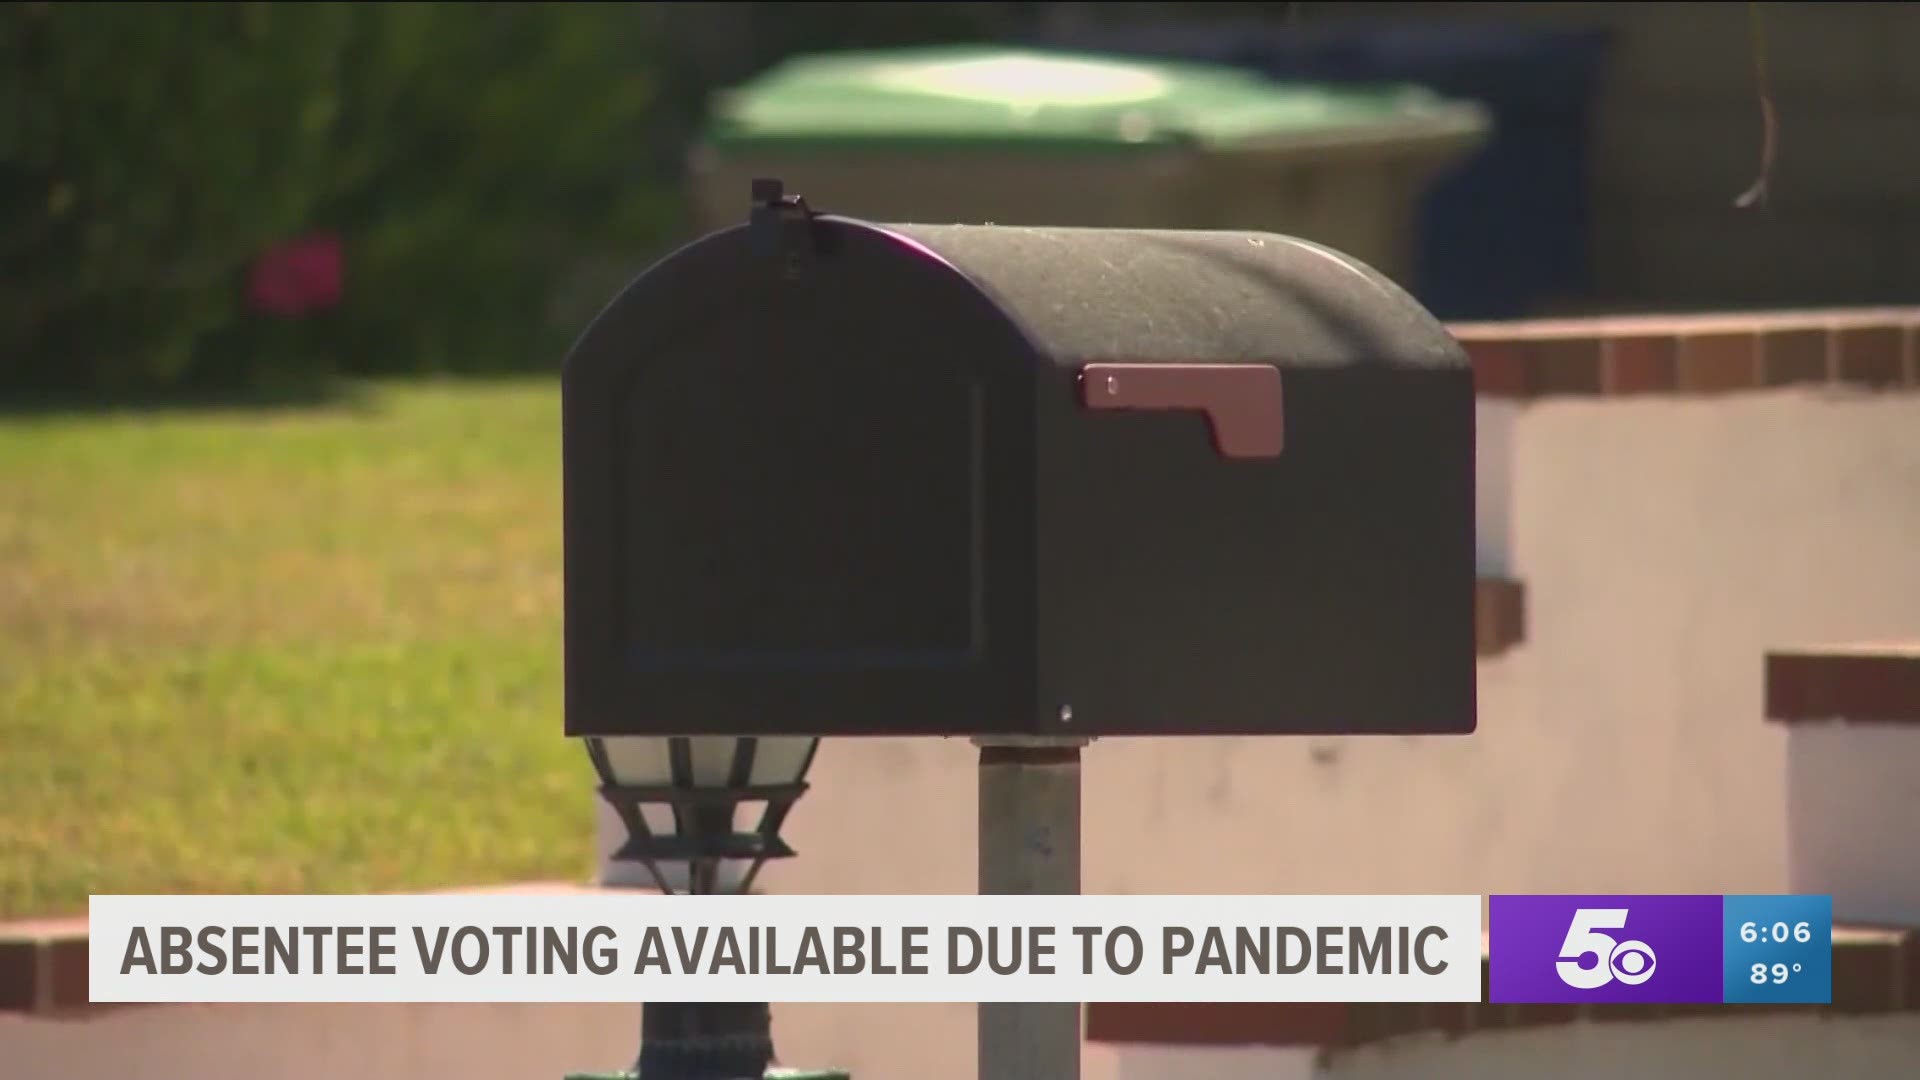 Absentee voting available for Arkansans due to coronavirus pandemic